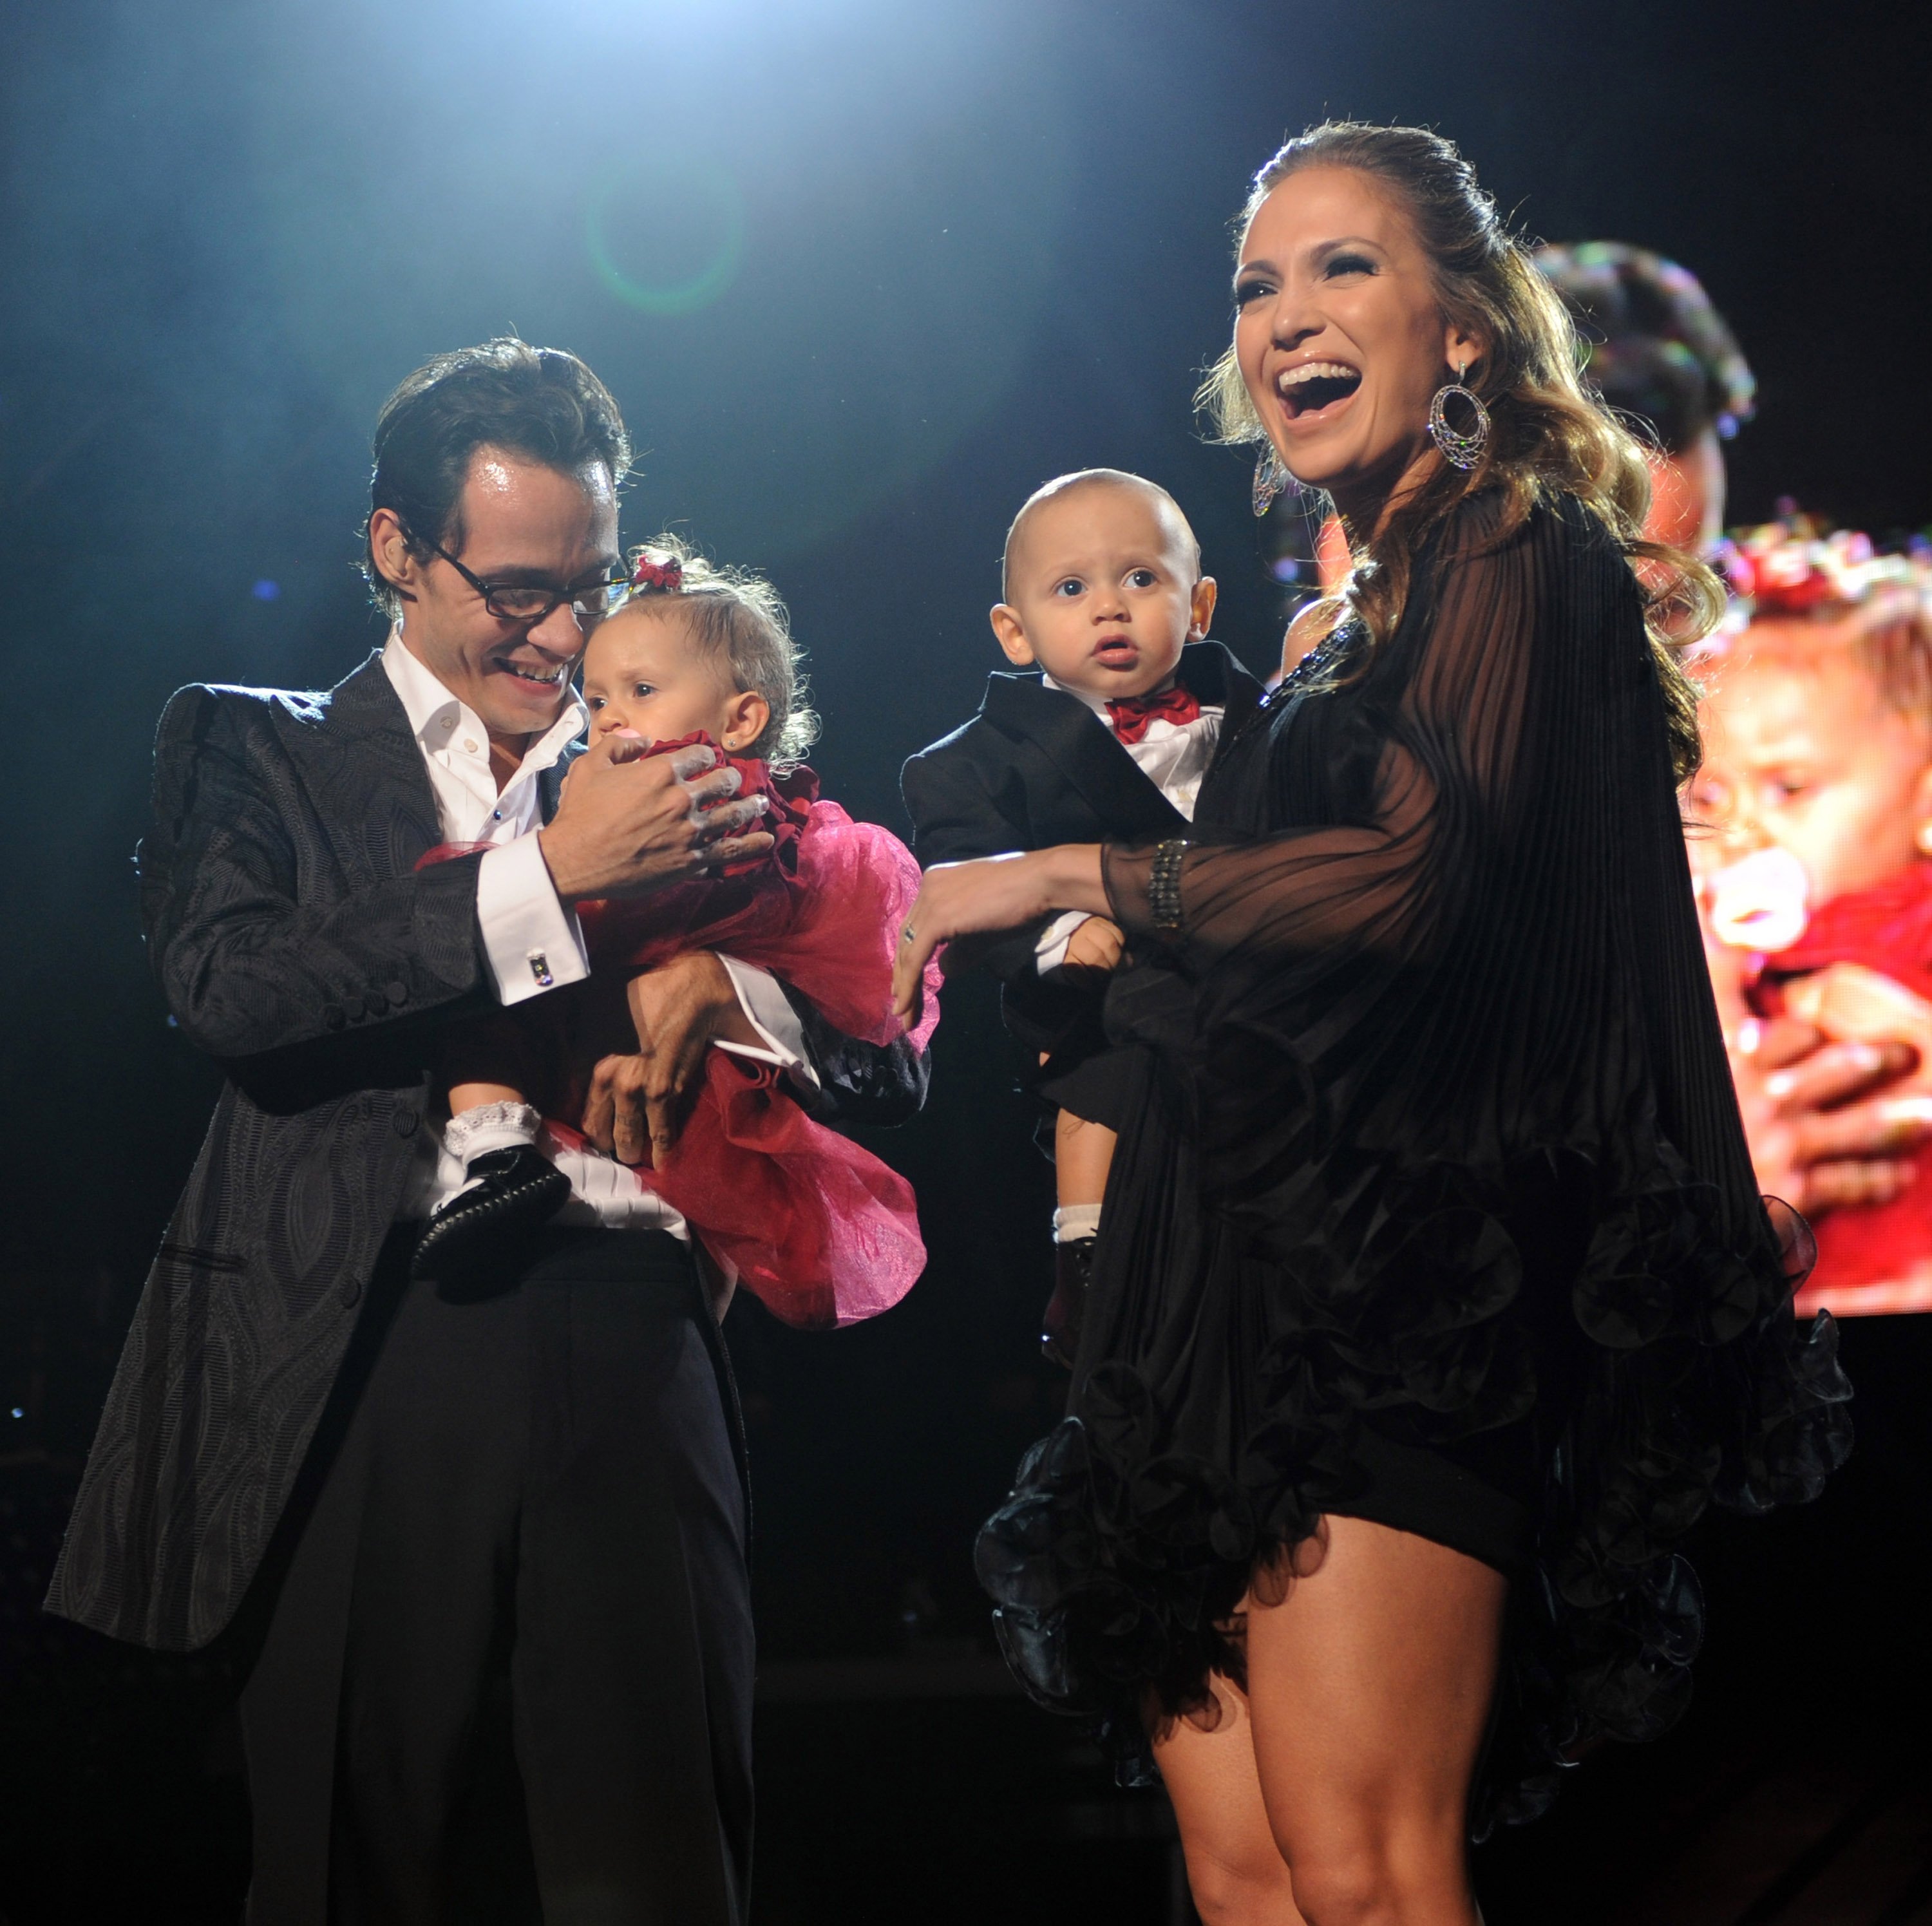 Marc Anthony, Jennifer Lopez pictured with their kids Max and Emme on stage at Madison Square Garden on February 14, 2009 in New York City. / Source: Getty Images